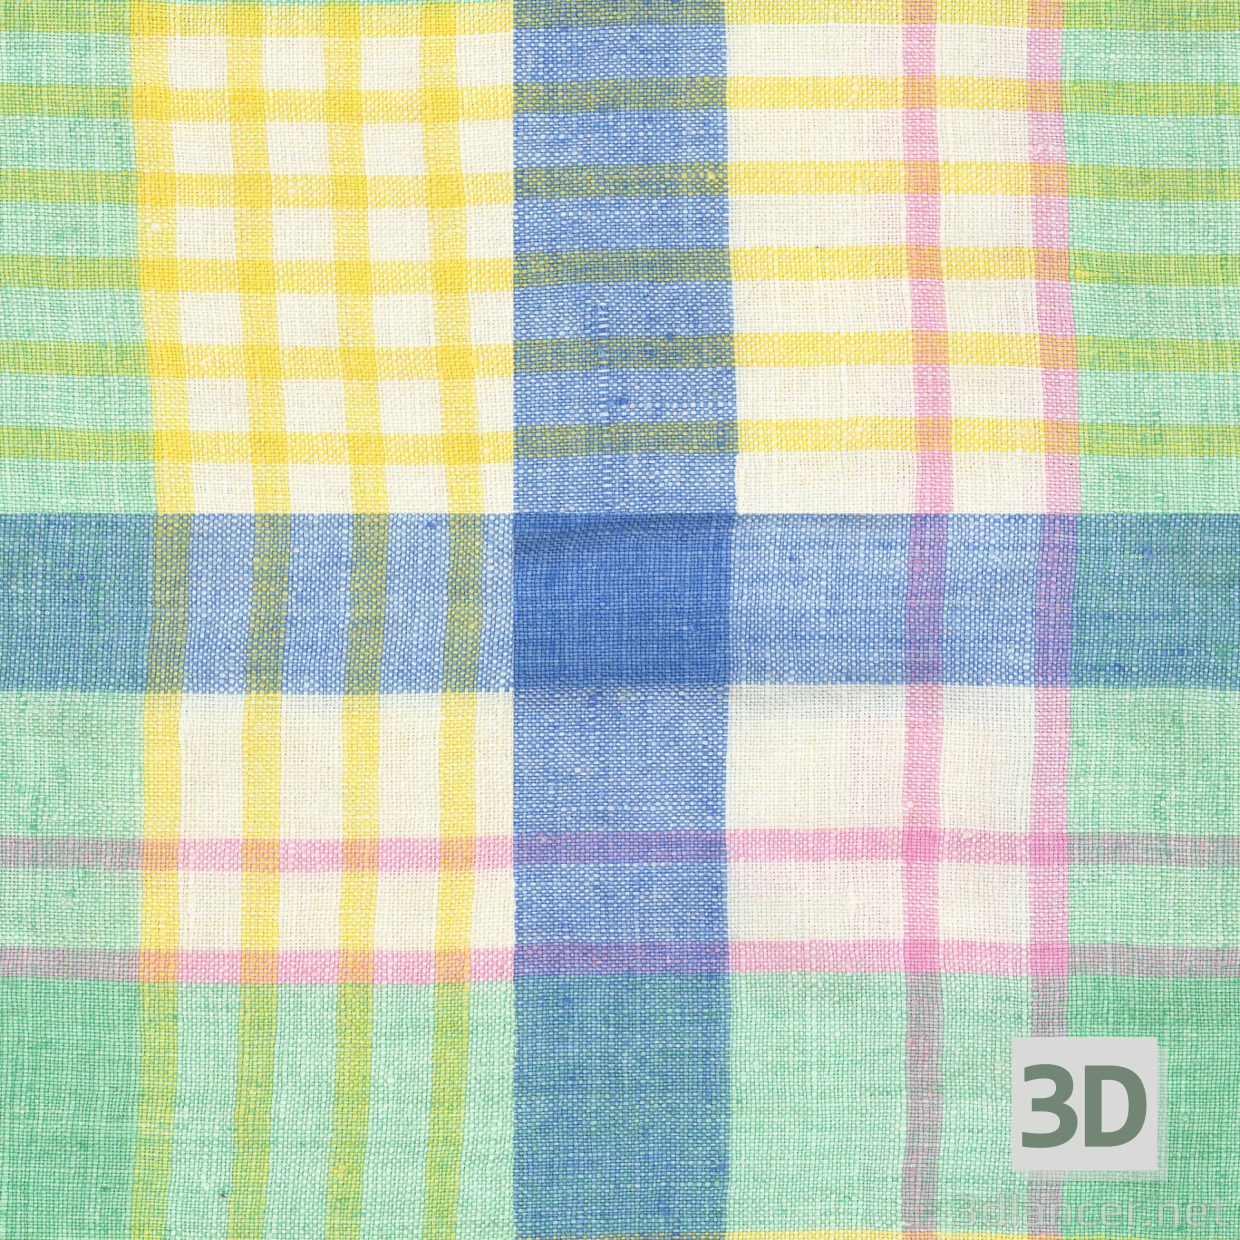 Texture plaid 11 free download - image